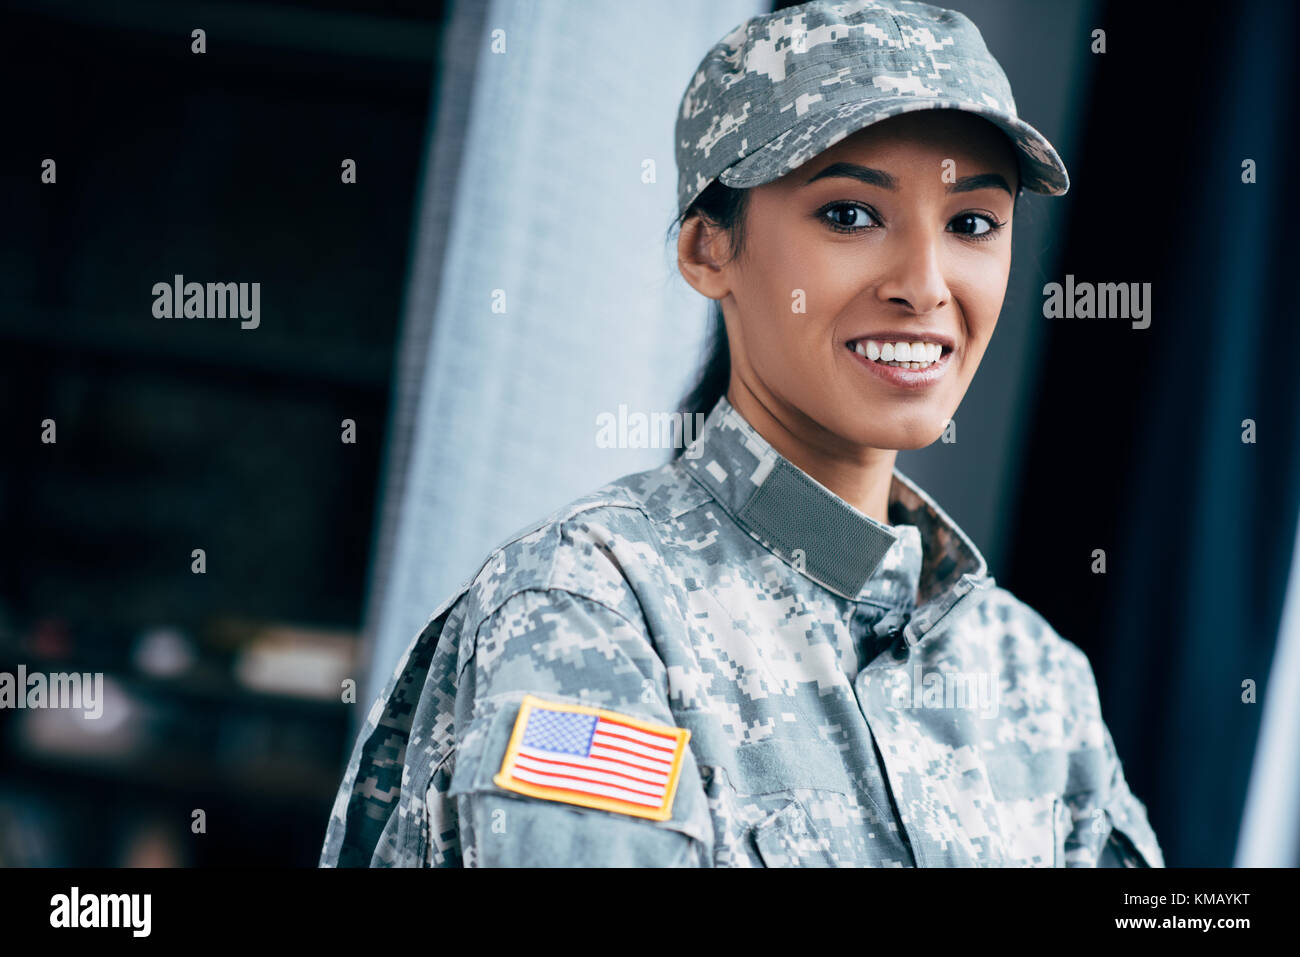 soldier with usa flag emblem Stock Photo